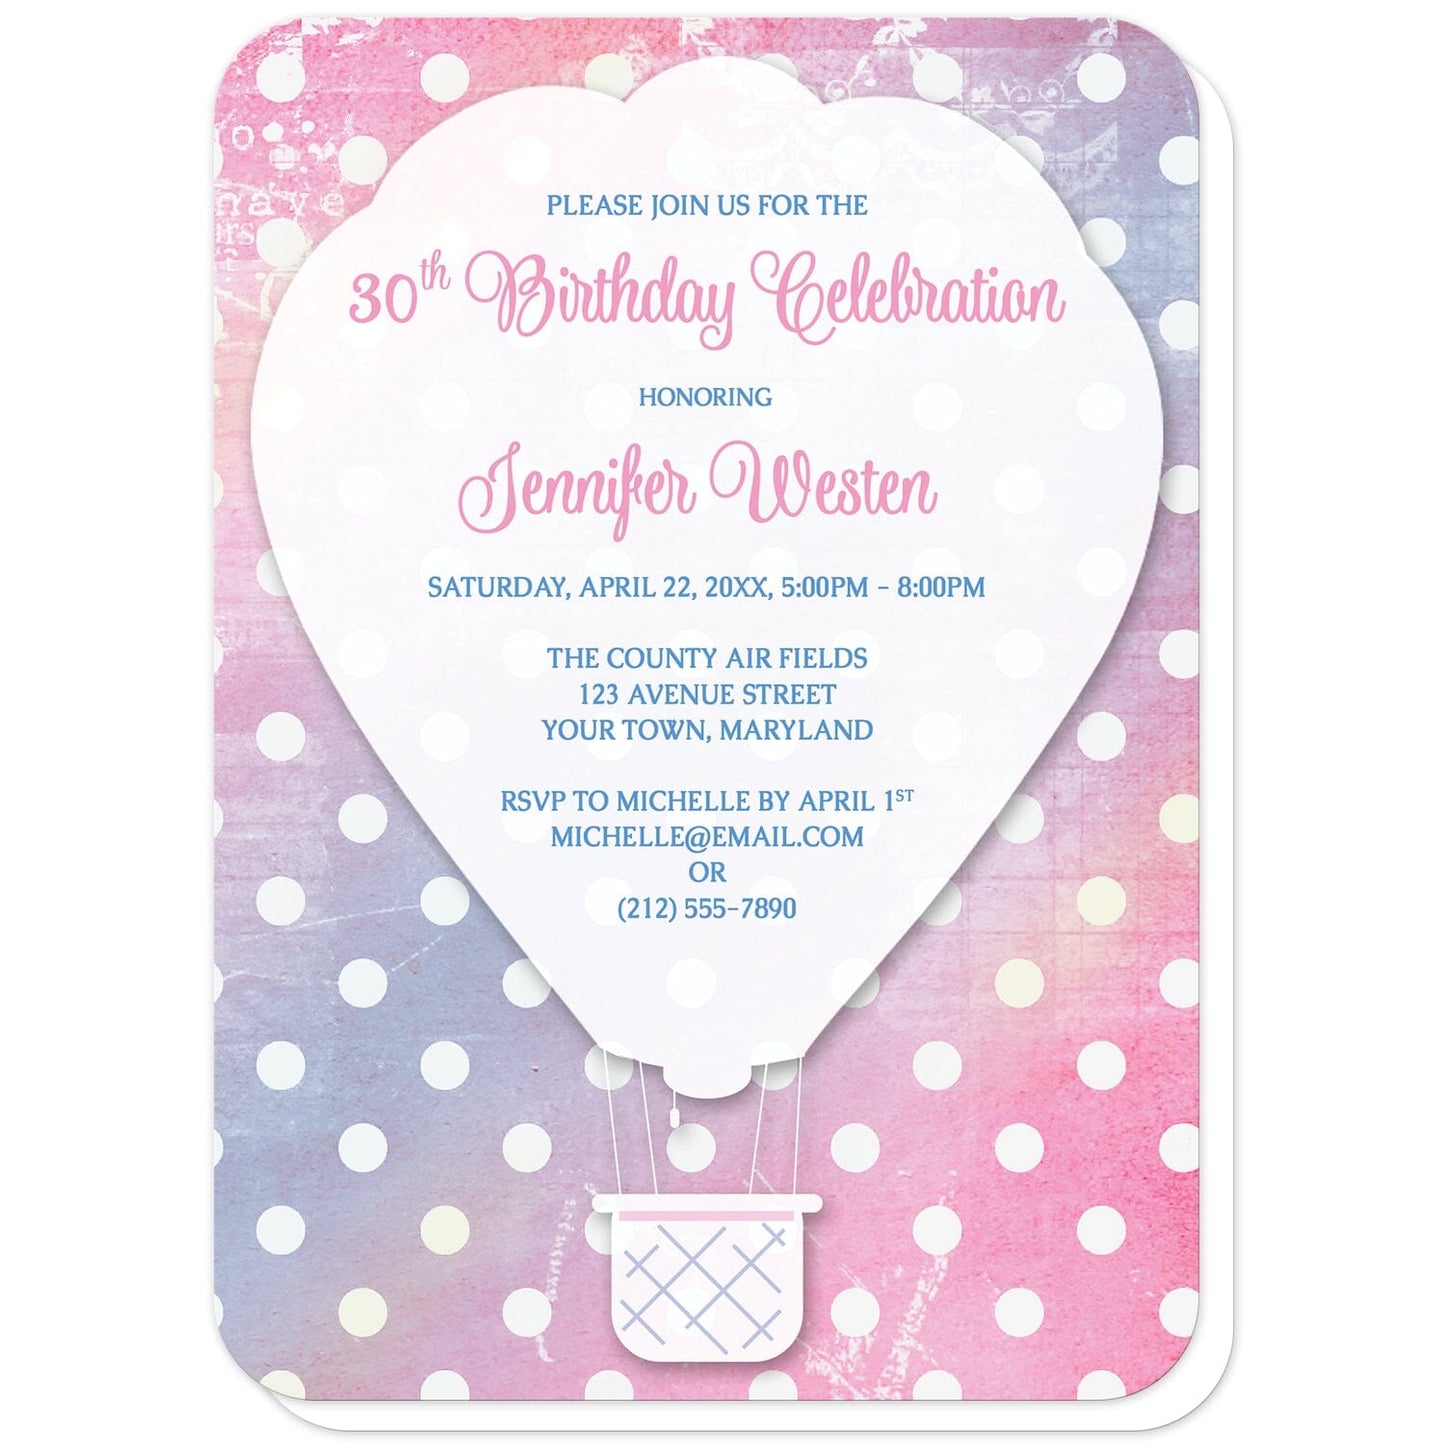 Pink Polka Dot Hot Air Balloon Birthday Invitations (with rounded corners) at Artistically Invited. Whimsical pink polka dot hot air balloon birthday invitations with a white silhouette hot air balloon over a pink, blue, and yellow rustic background covered in a white polka dot pattern. Your personalized birthday details are custom printed in pink and blue over the white hot air balloon. 